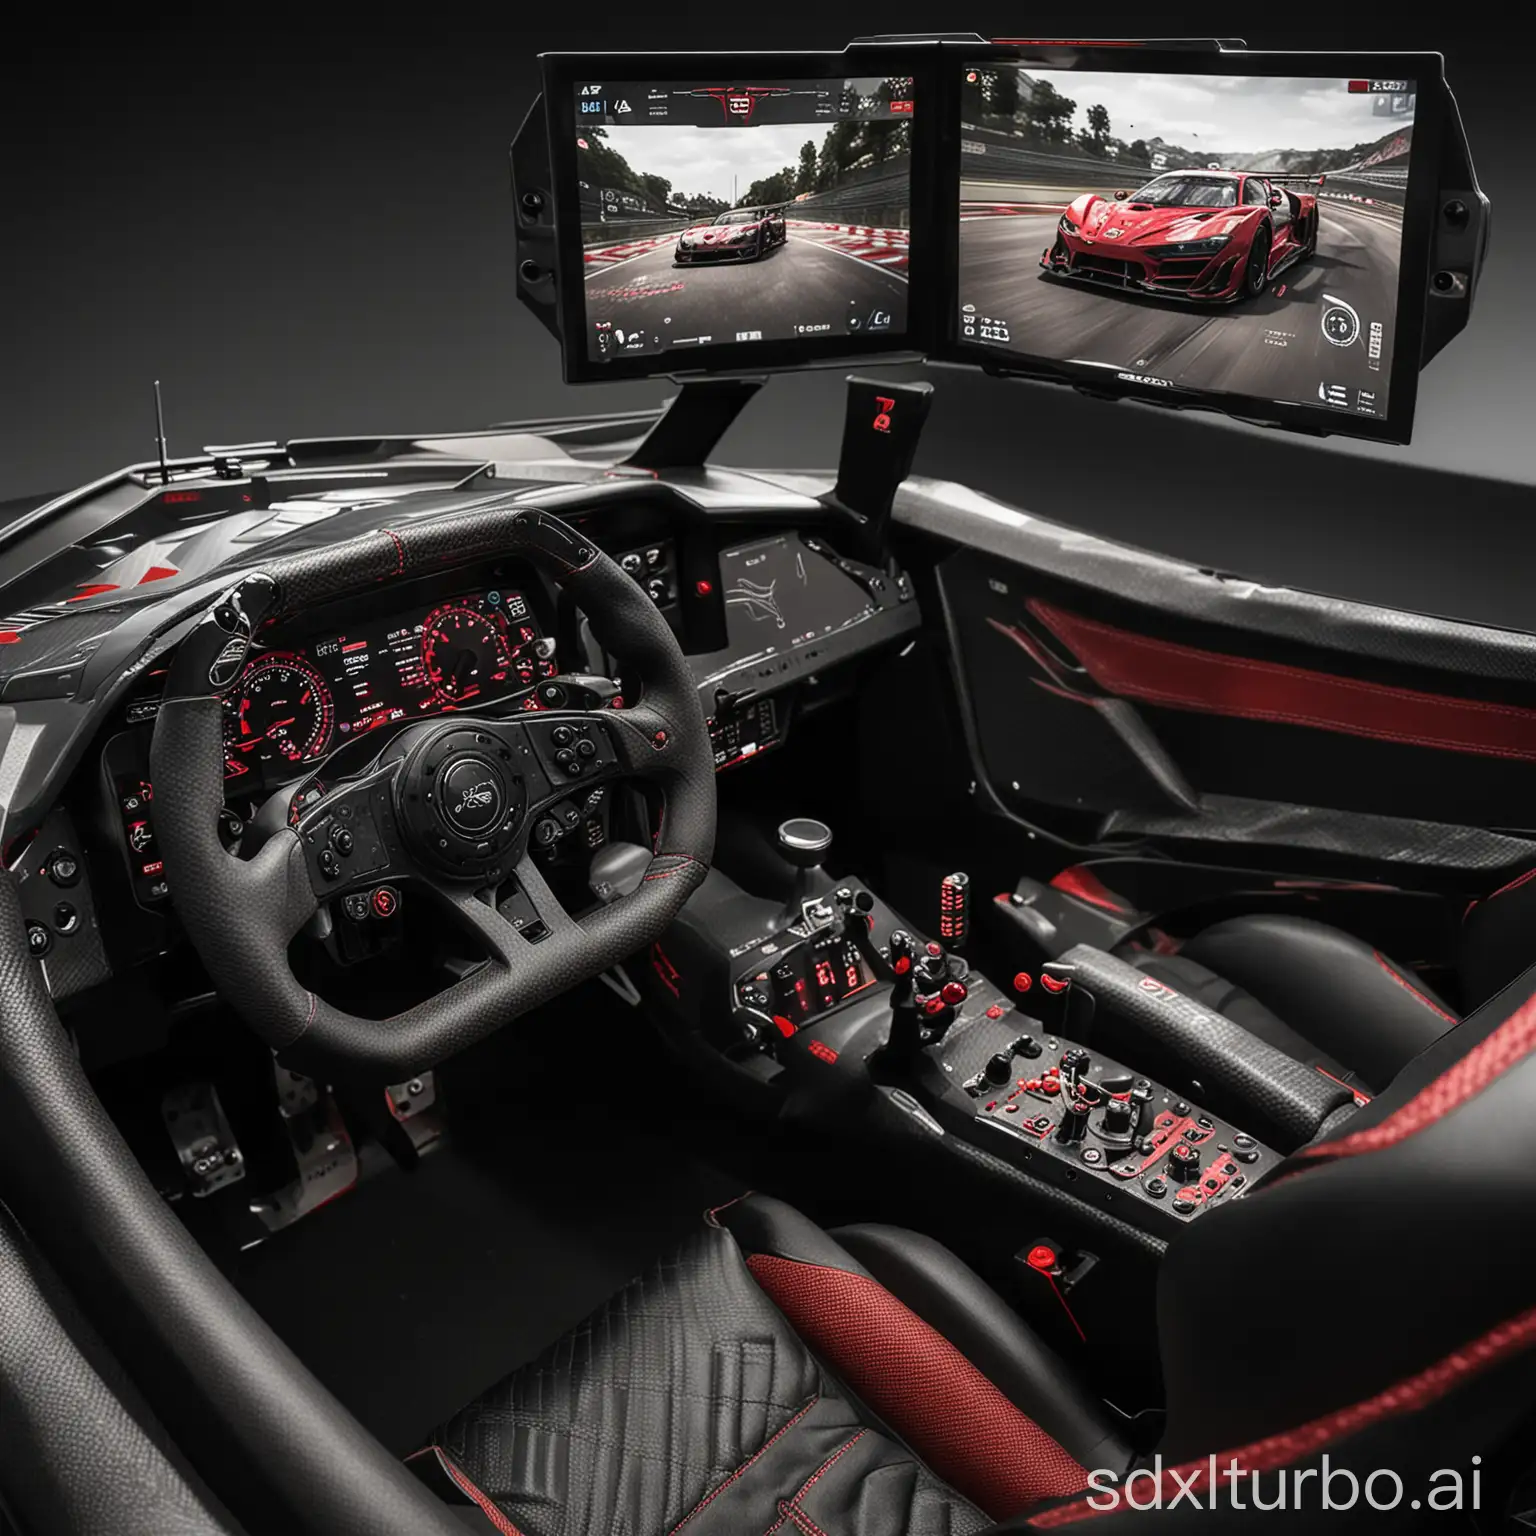 Sim-Racing-Cockpit-with-Carbon-Fiber-Accents-and-RedStitched-Steering-Wheel